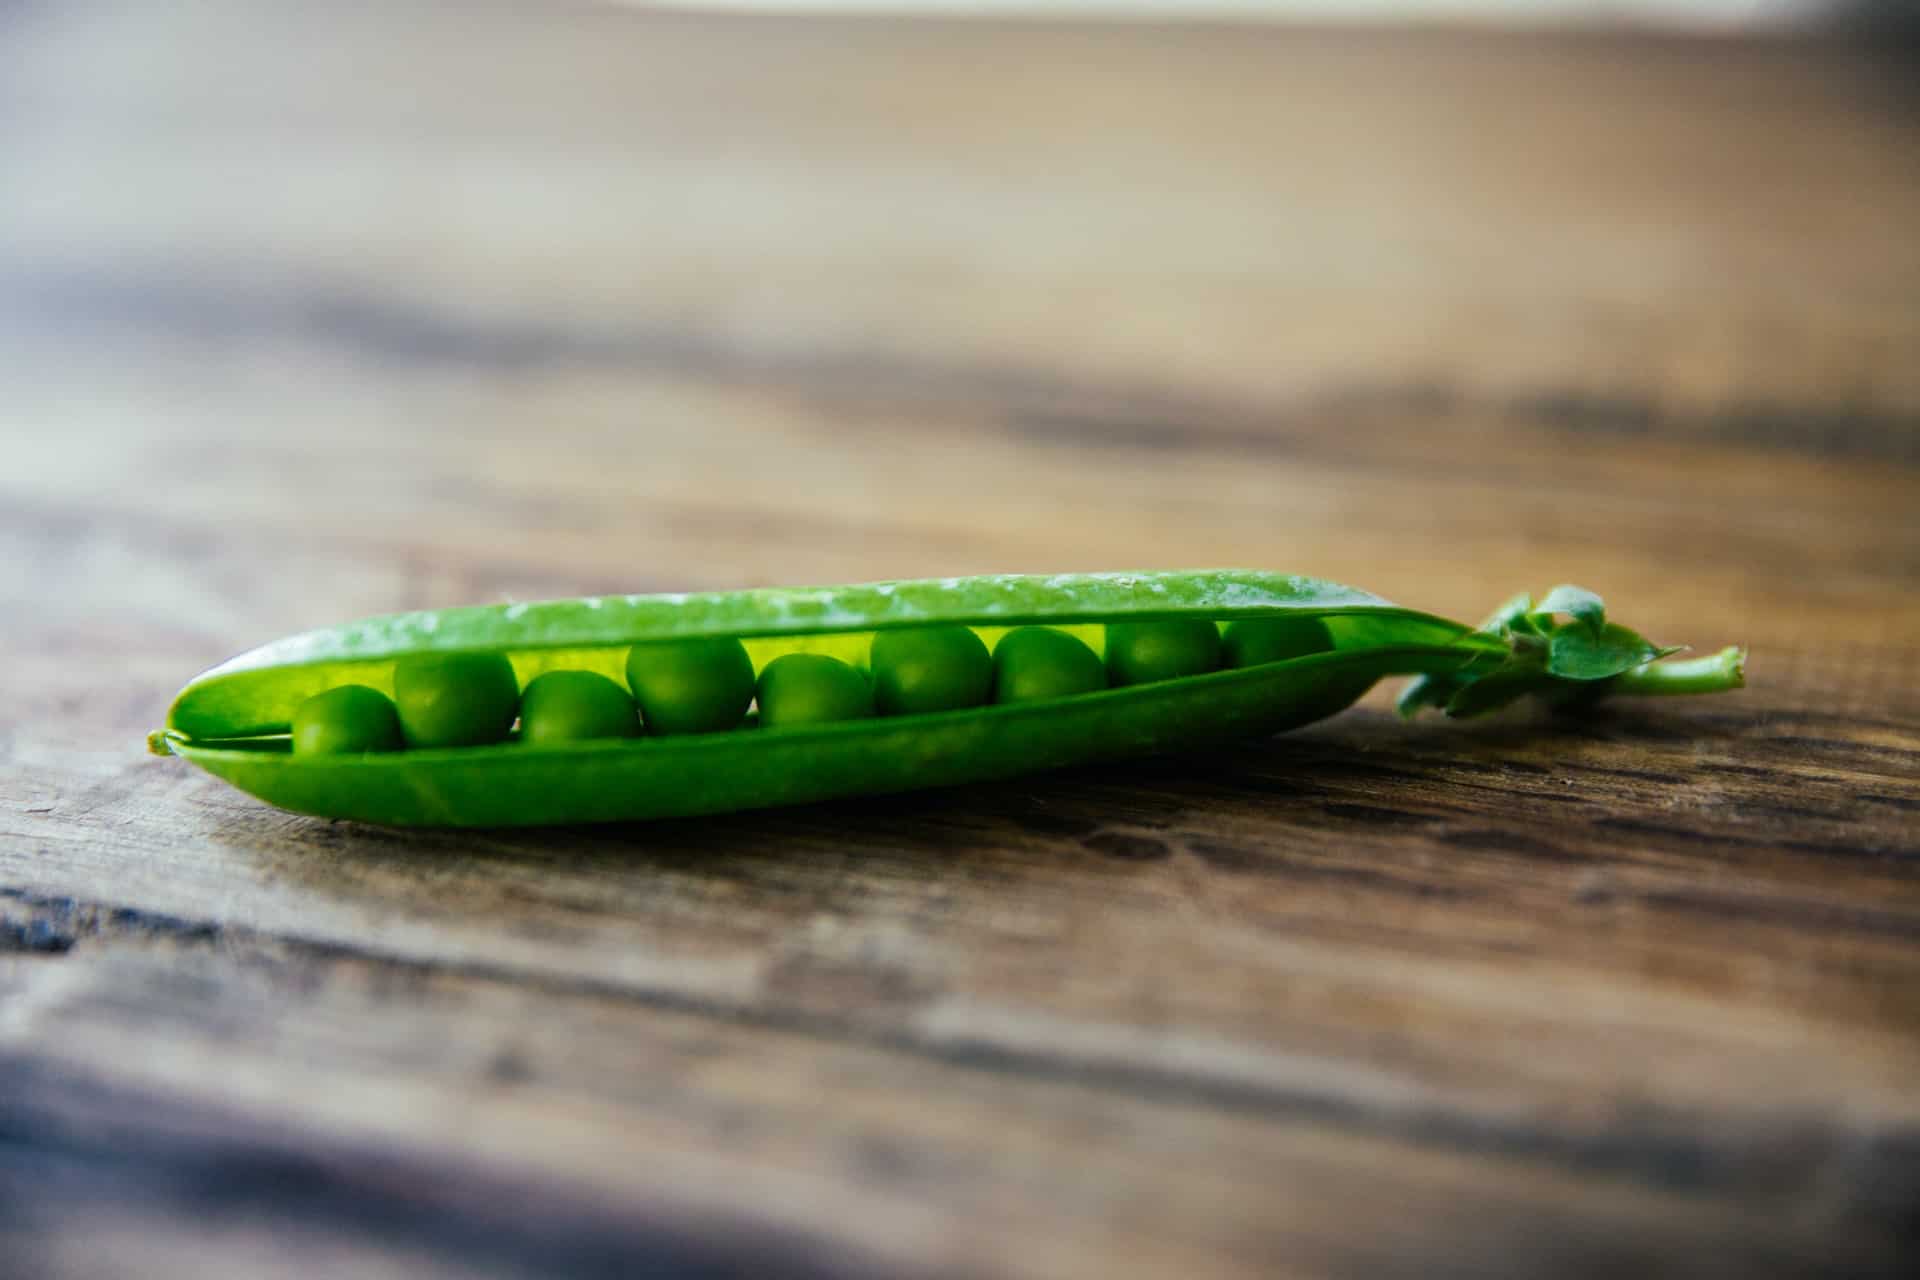 Scholarship Guide The 80/20 Rule For Studying peas in a pod